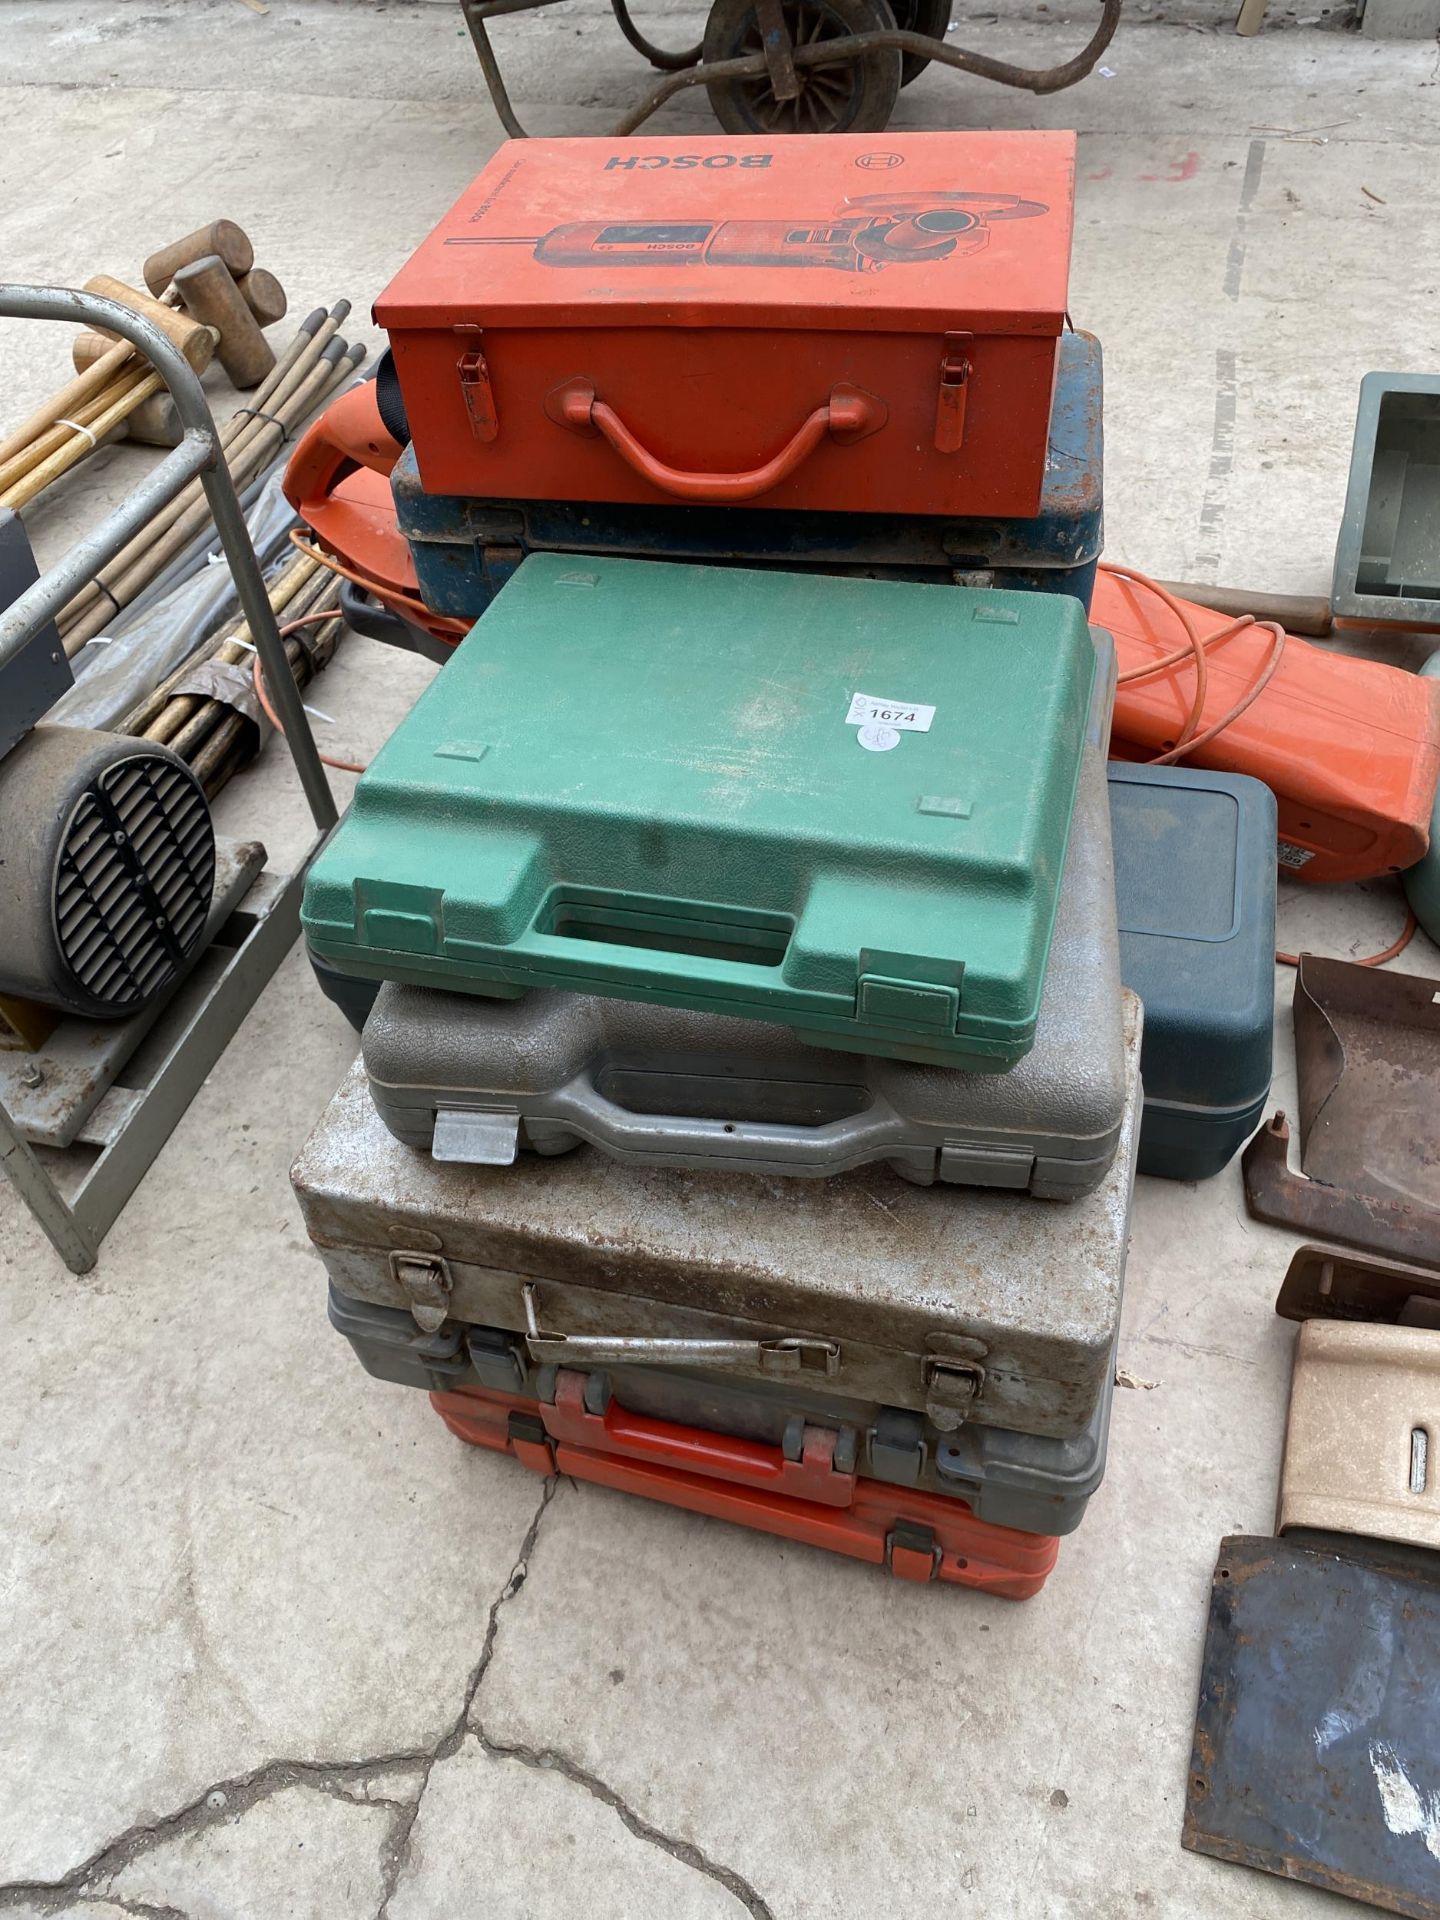 TEN ASSORTED POWER TOOL BOXES